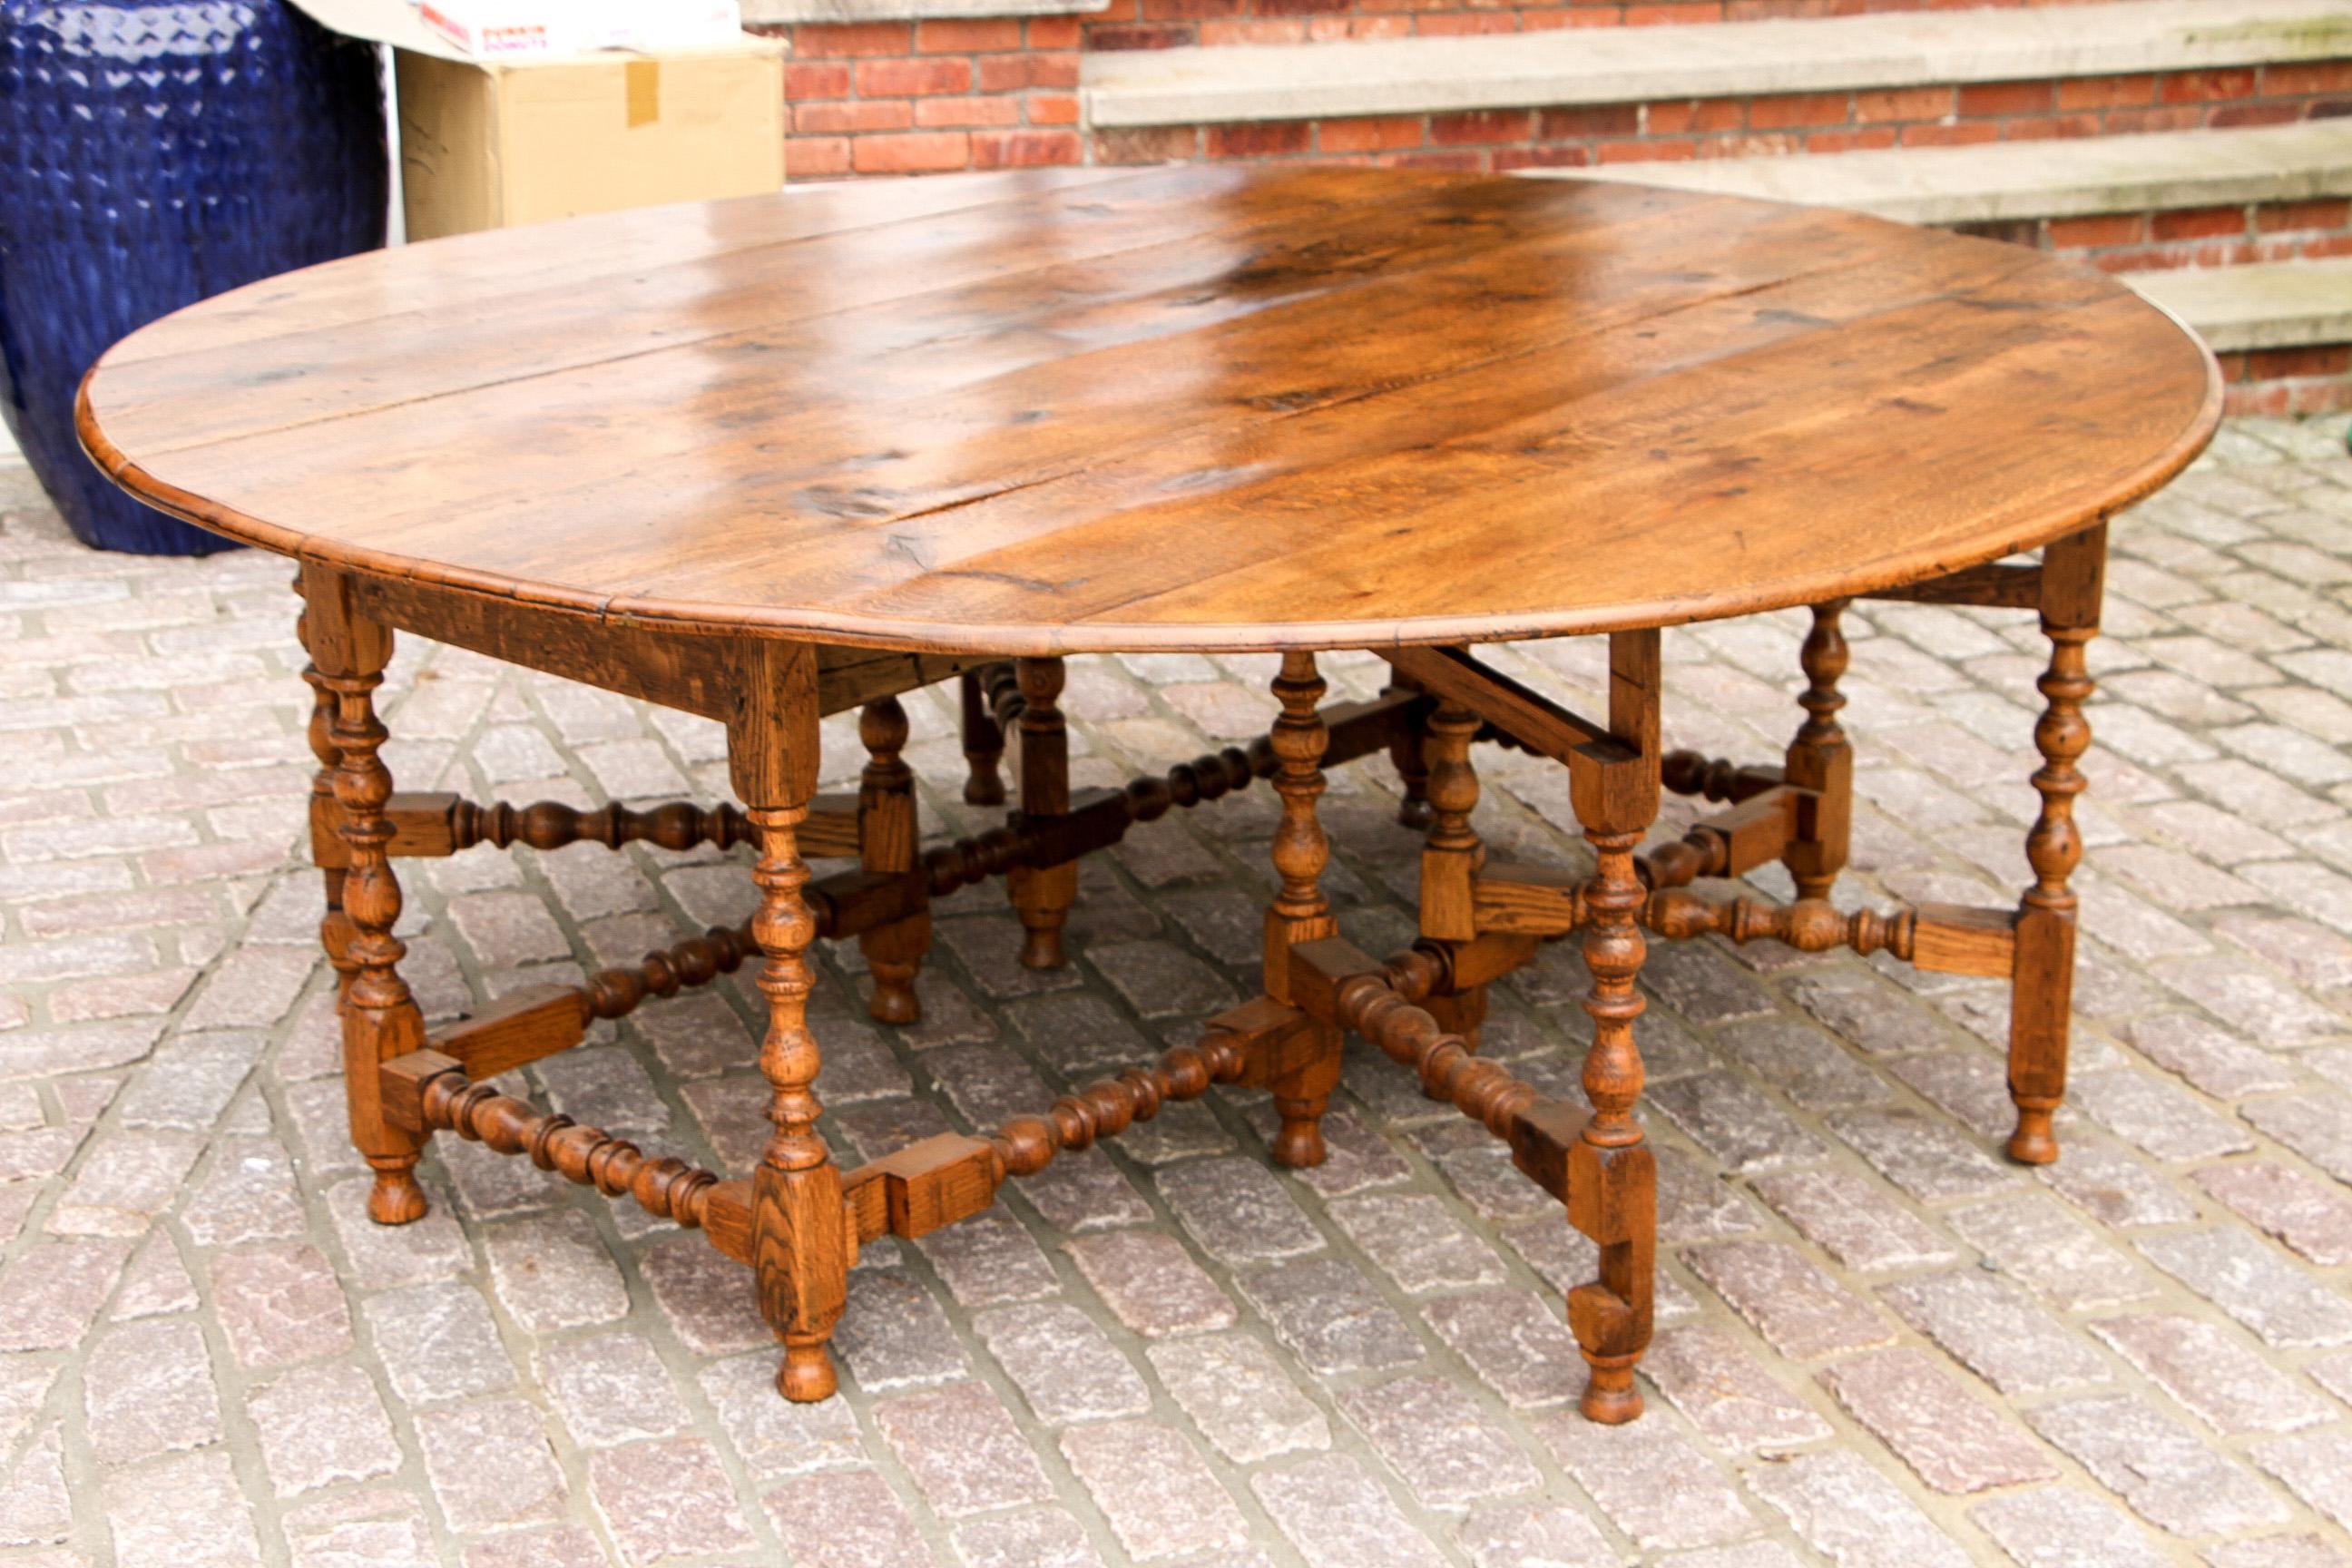 19th century oak drop-leaf gate-leg dining table, heavily turned legs, box stretcher. Expected wear and signs of use including evidence of past repairs, checking, surface scratching and sporadic nicking, some warping to areas. Measures: 79 1/2